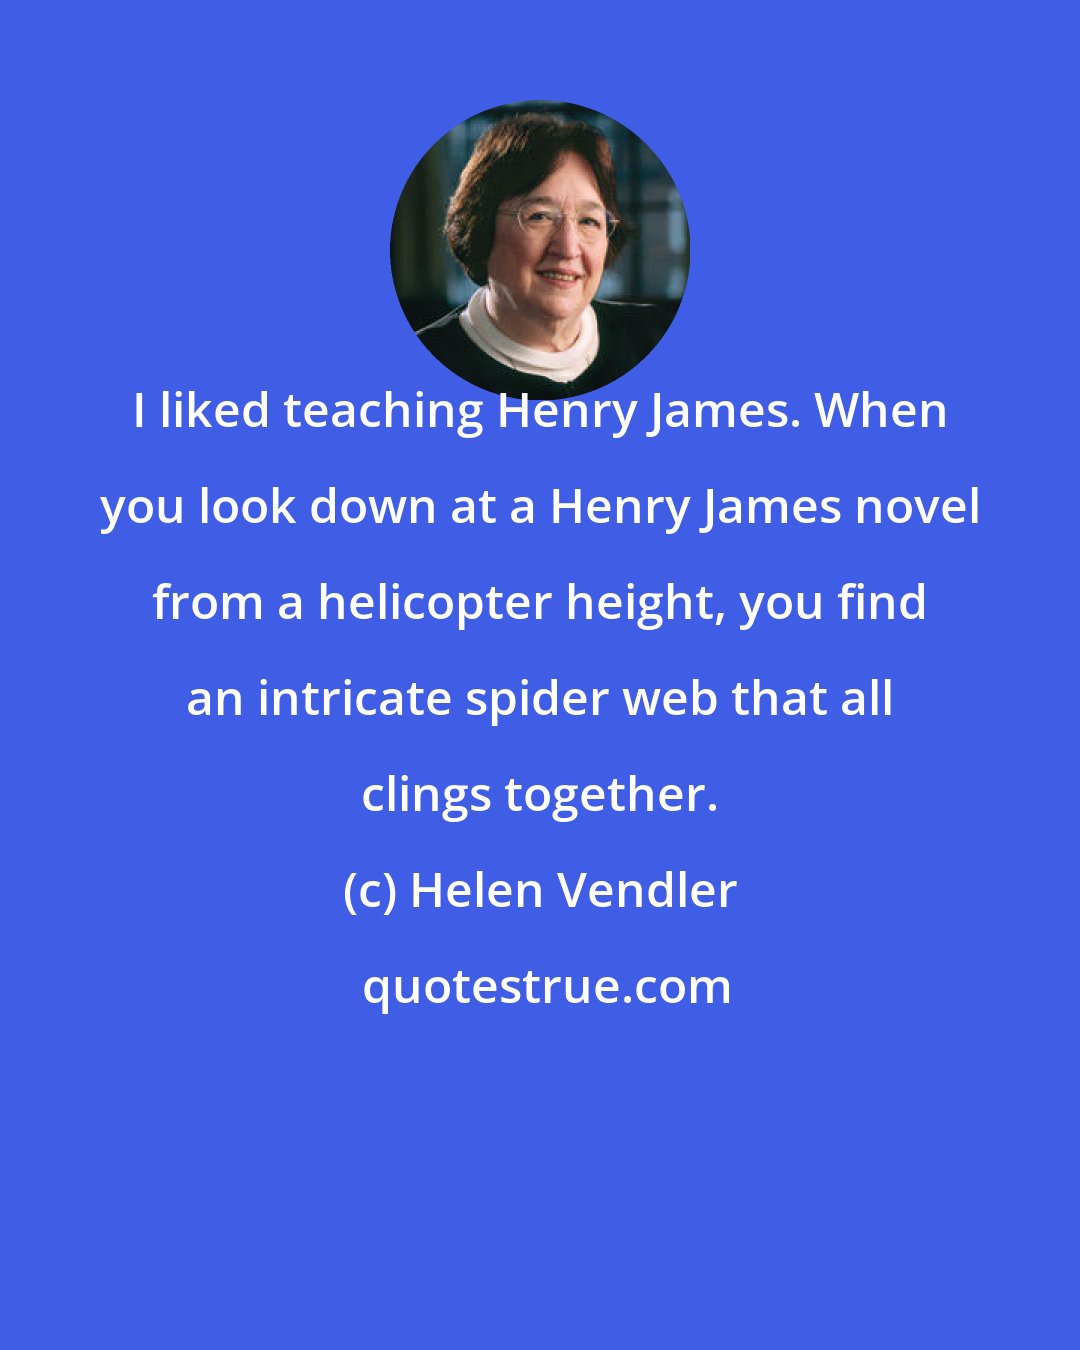 Helen Vendler: I liked teaching Henry James. When you look down at a Henry James novel from a helicopter height, you find an intricate spider web that all clings together.